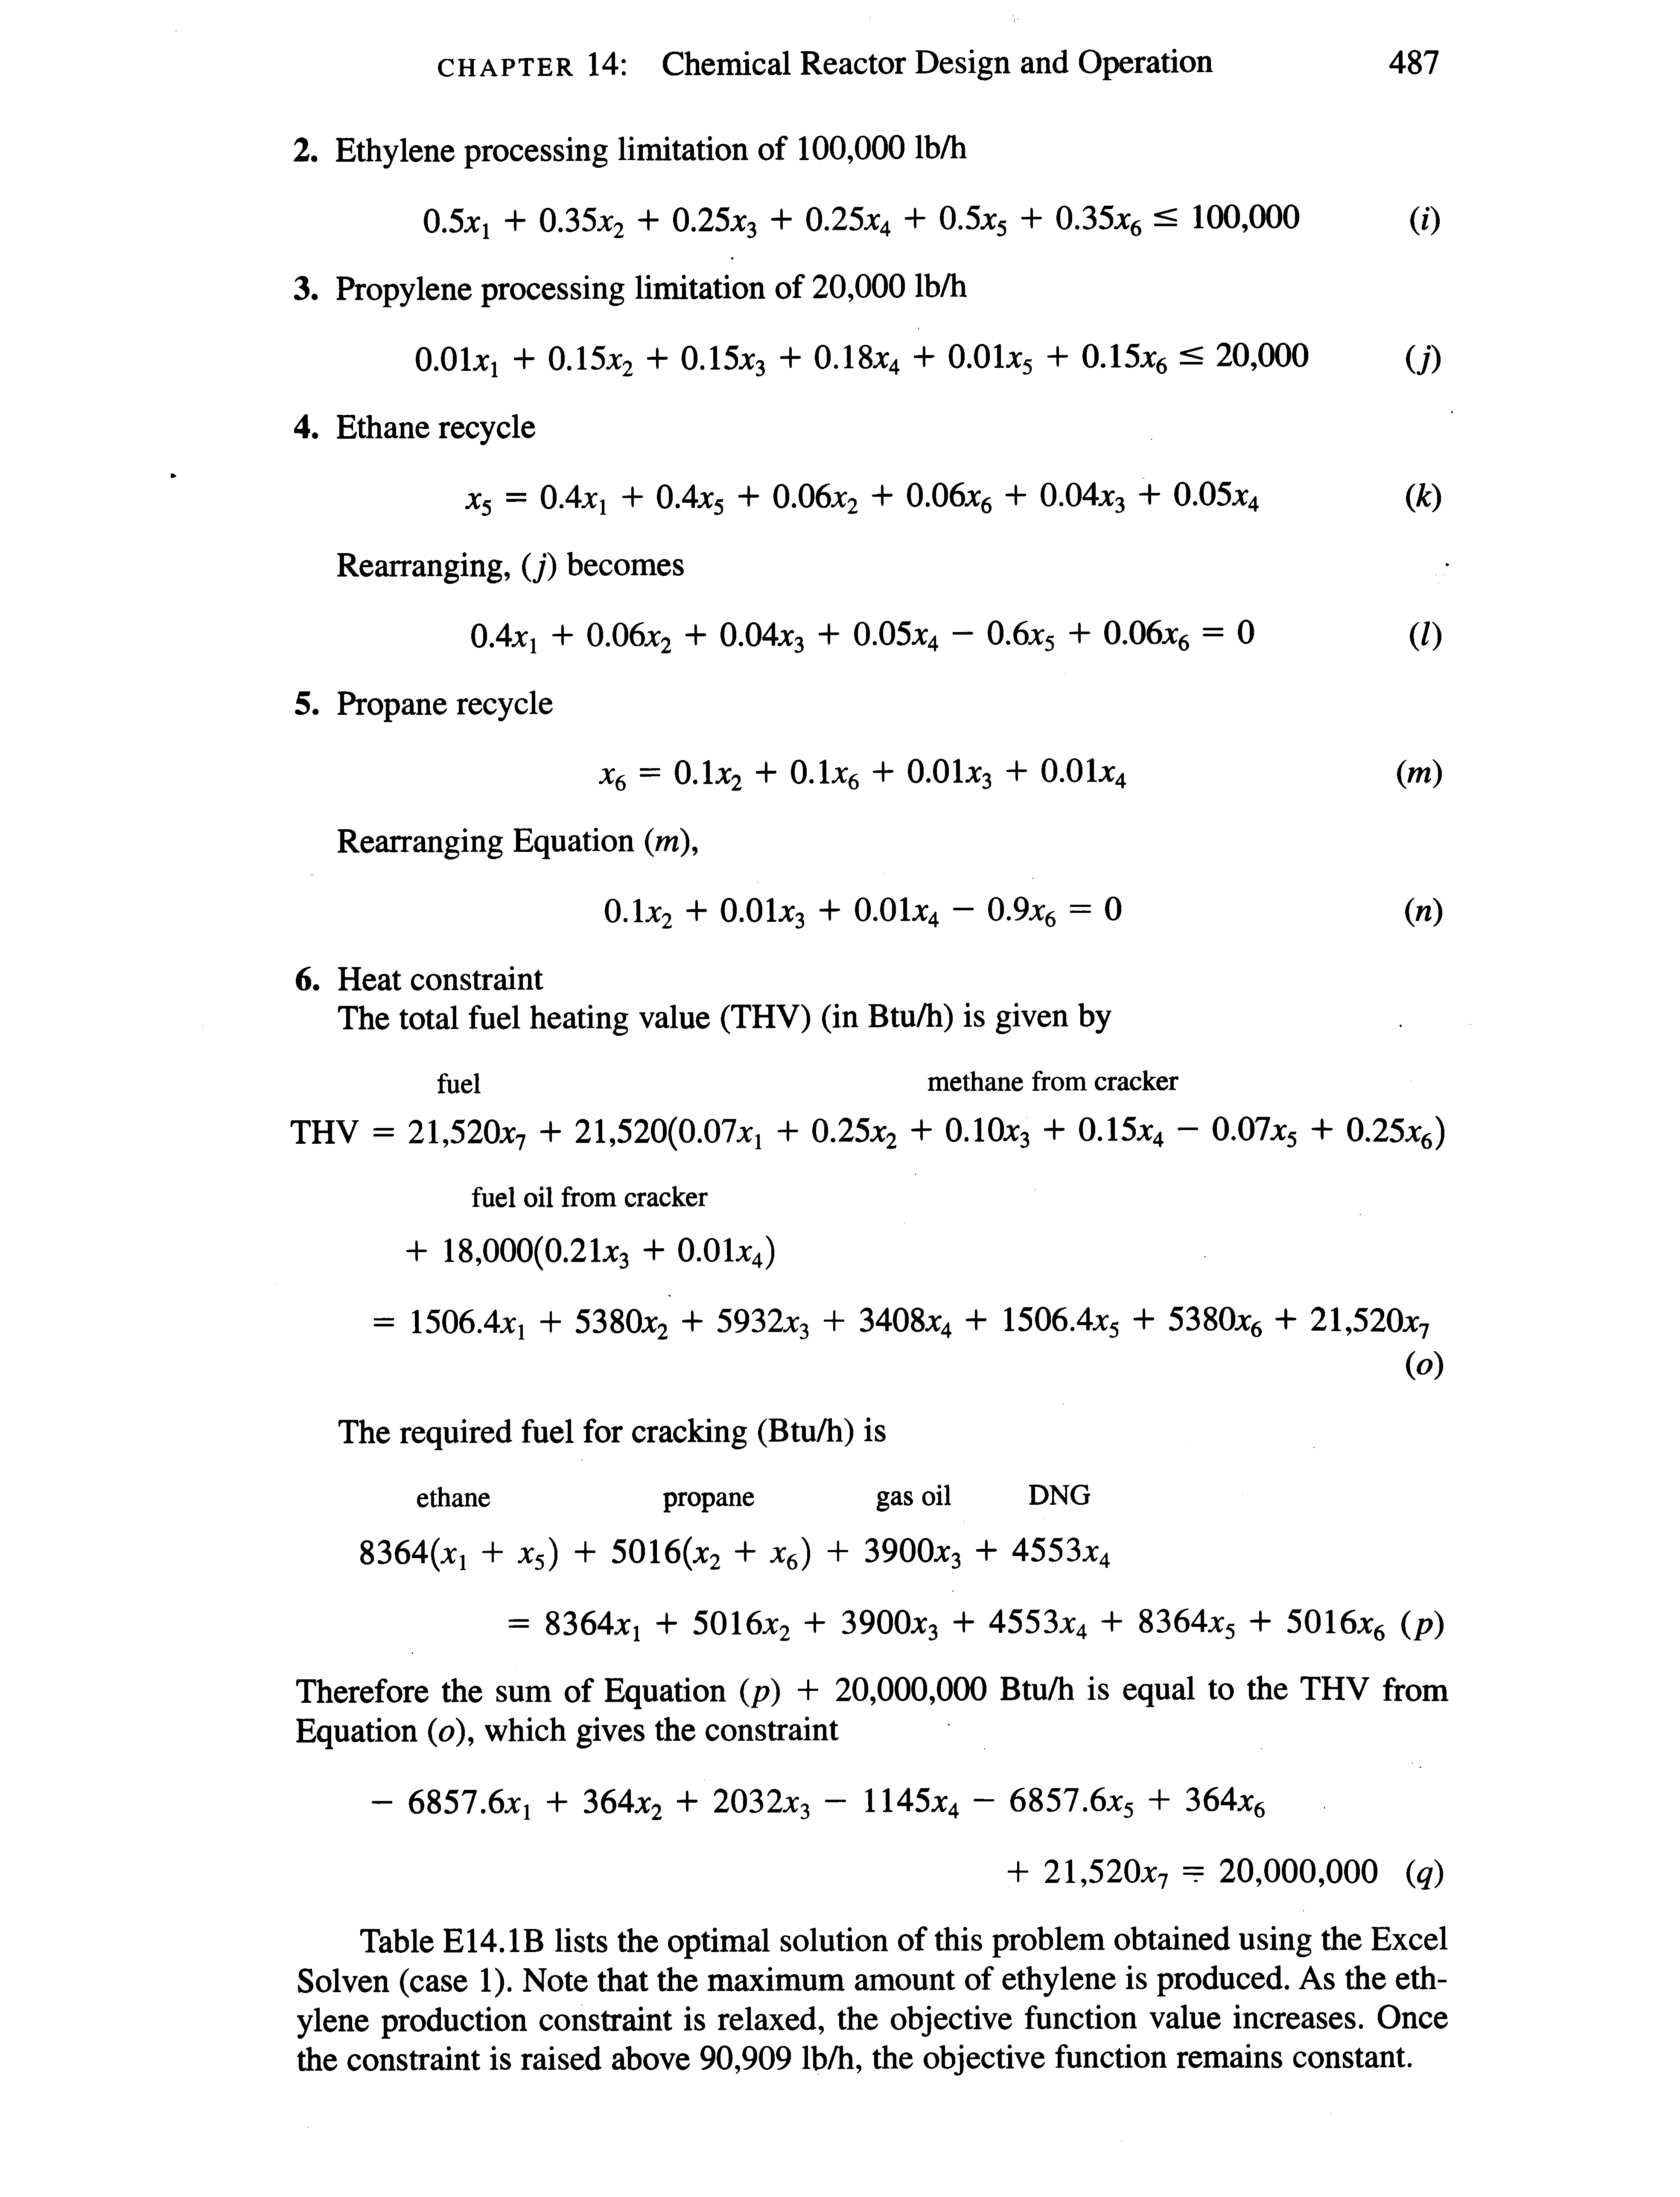 Table E14.1B lists the optimal solution of this problem obtained using the Excel Solven (case 1). Note that the maximum amount of ethylene is produced. As the ethylene production constraint is relaxed, the objective function value increases. Once the constraint is raised above 90,909 lb/h, the objective function remains constant.